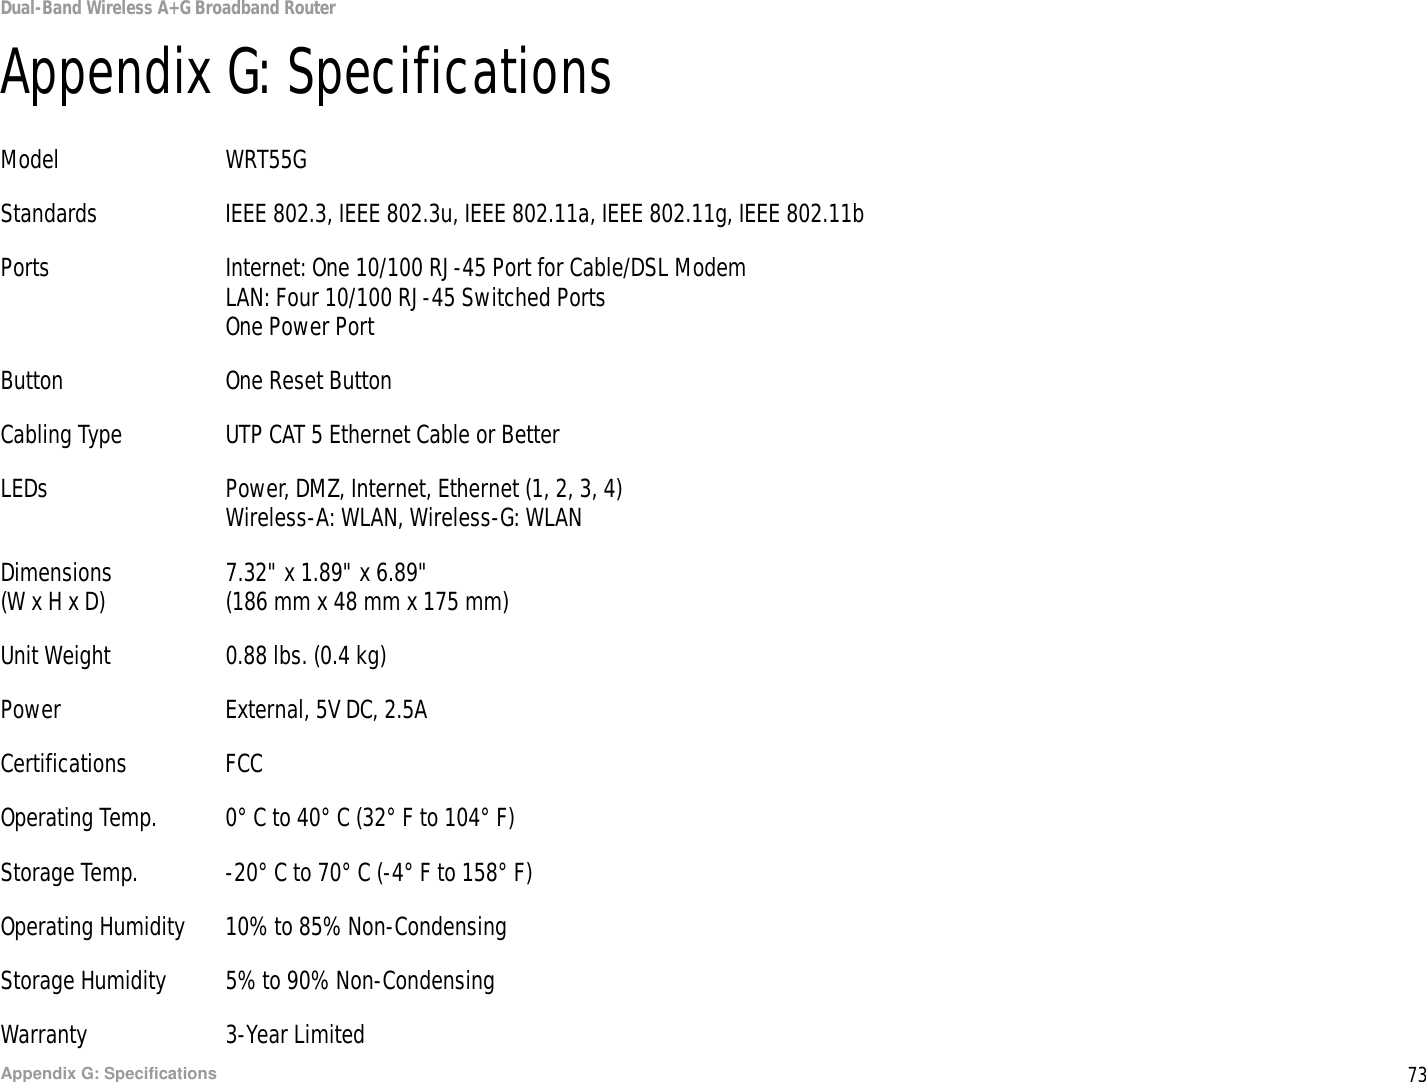 73Appendix G: SpecificationsDual-Band Wireless A+G Broadband RouterAppendix G: SpecificationsModel WRT55GStandards IEEE 802.3, IEEE 802.3u, IEEE 802.11a, IEEE 802.11g, IEEE 802.11bPorts Internet: One 10/100 RJ-45 Port for Cable/DSL ModemLAN: Four 10/100 RJ-45 Switched PortsOne Power PortButton One Reset ButtonCabling Type UTP CAT 5 Ethernet Cable or BetterLEDs Power, DMZ, Internet, Ethernet (1, 2, 3, 4)Wireless-A: WLAN, Wireless-G: WLANDimensions 7.32&quot; x 1.89&quot; x 6.89&quot;(W x H x D) (186 mm x 48 mm x 175 mm)Unit Weight 0.88 lbs. (0.4 kg)Power External, 5V DC, 2.5ACertifications FCCOperating Temp. 0° C to 40° C (32° F to 104° F)Storage Temp. -20° C to 70° C (-4° F to 158° F)Operating Humidity 10% to 85% Non-CondensingStorage Humidity 5% to 90% Non-CondensingWarranty 3-Year Limited